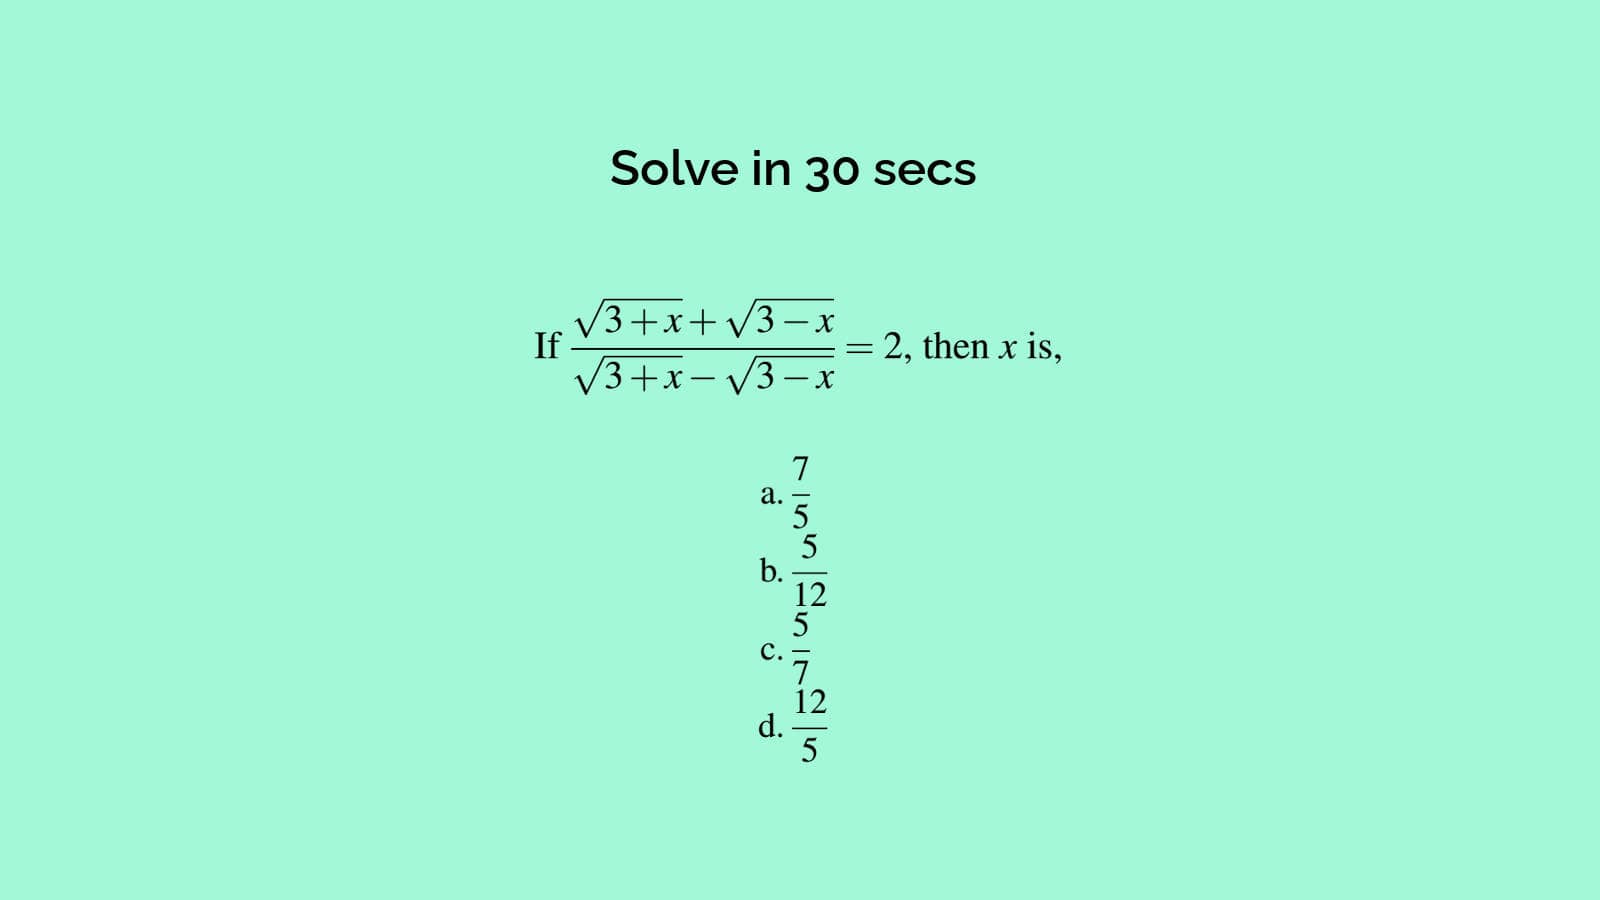 How to Solve Componendo Dividendo Questions on Algebra Quickly